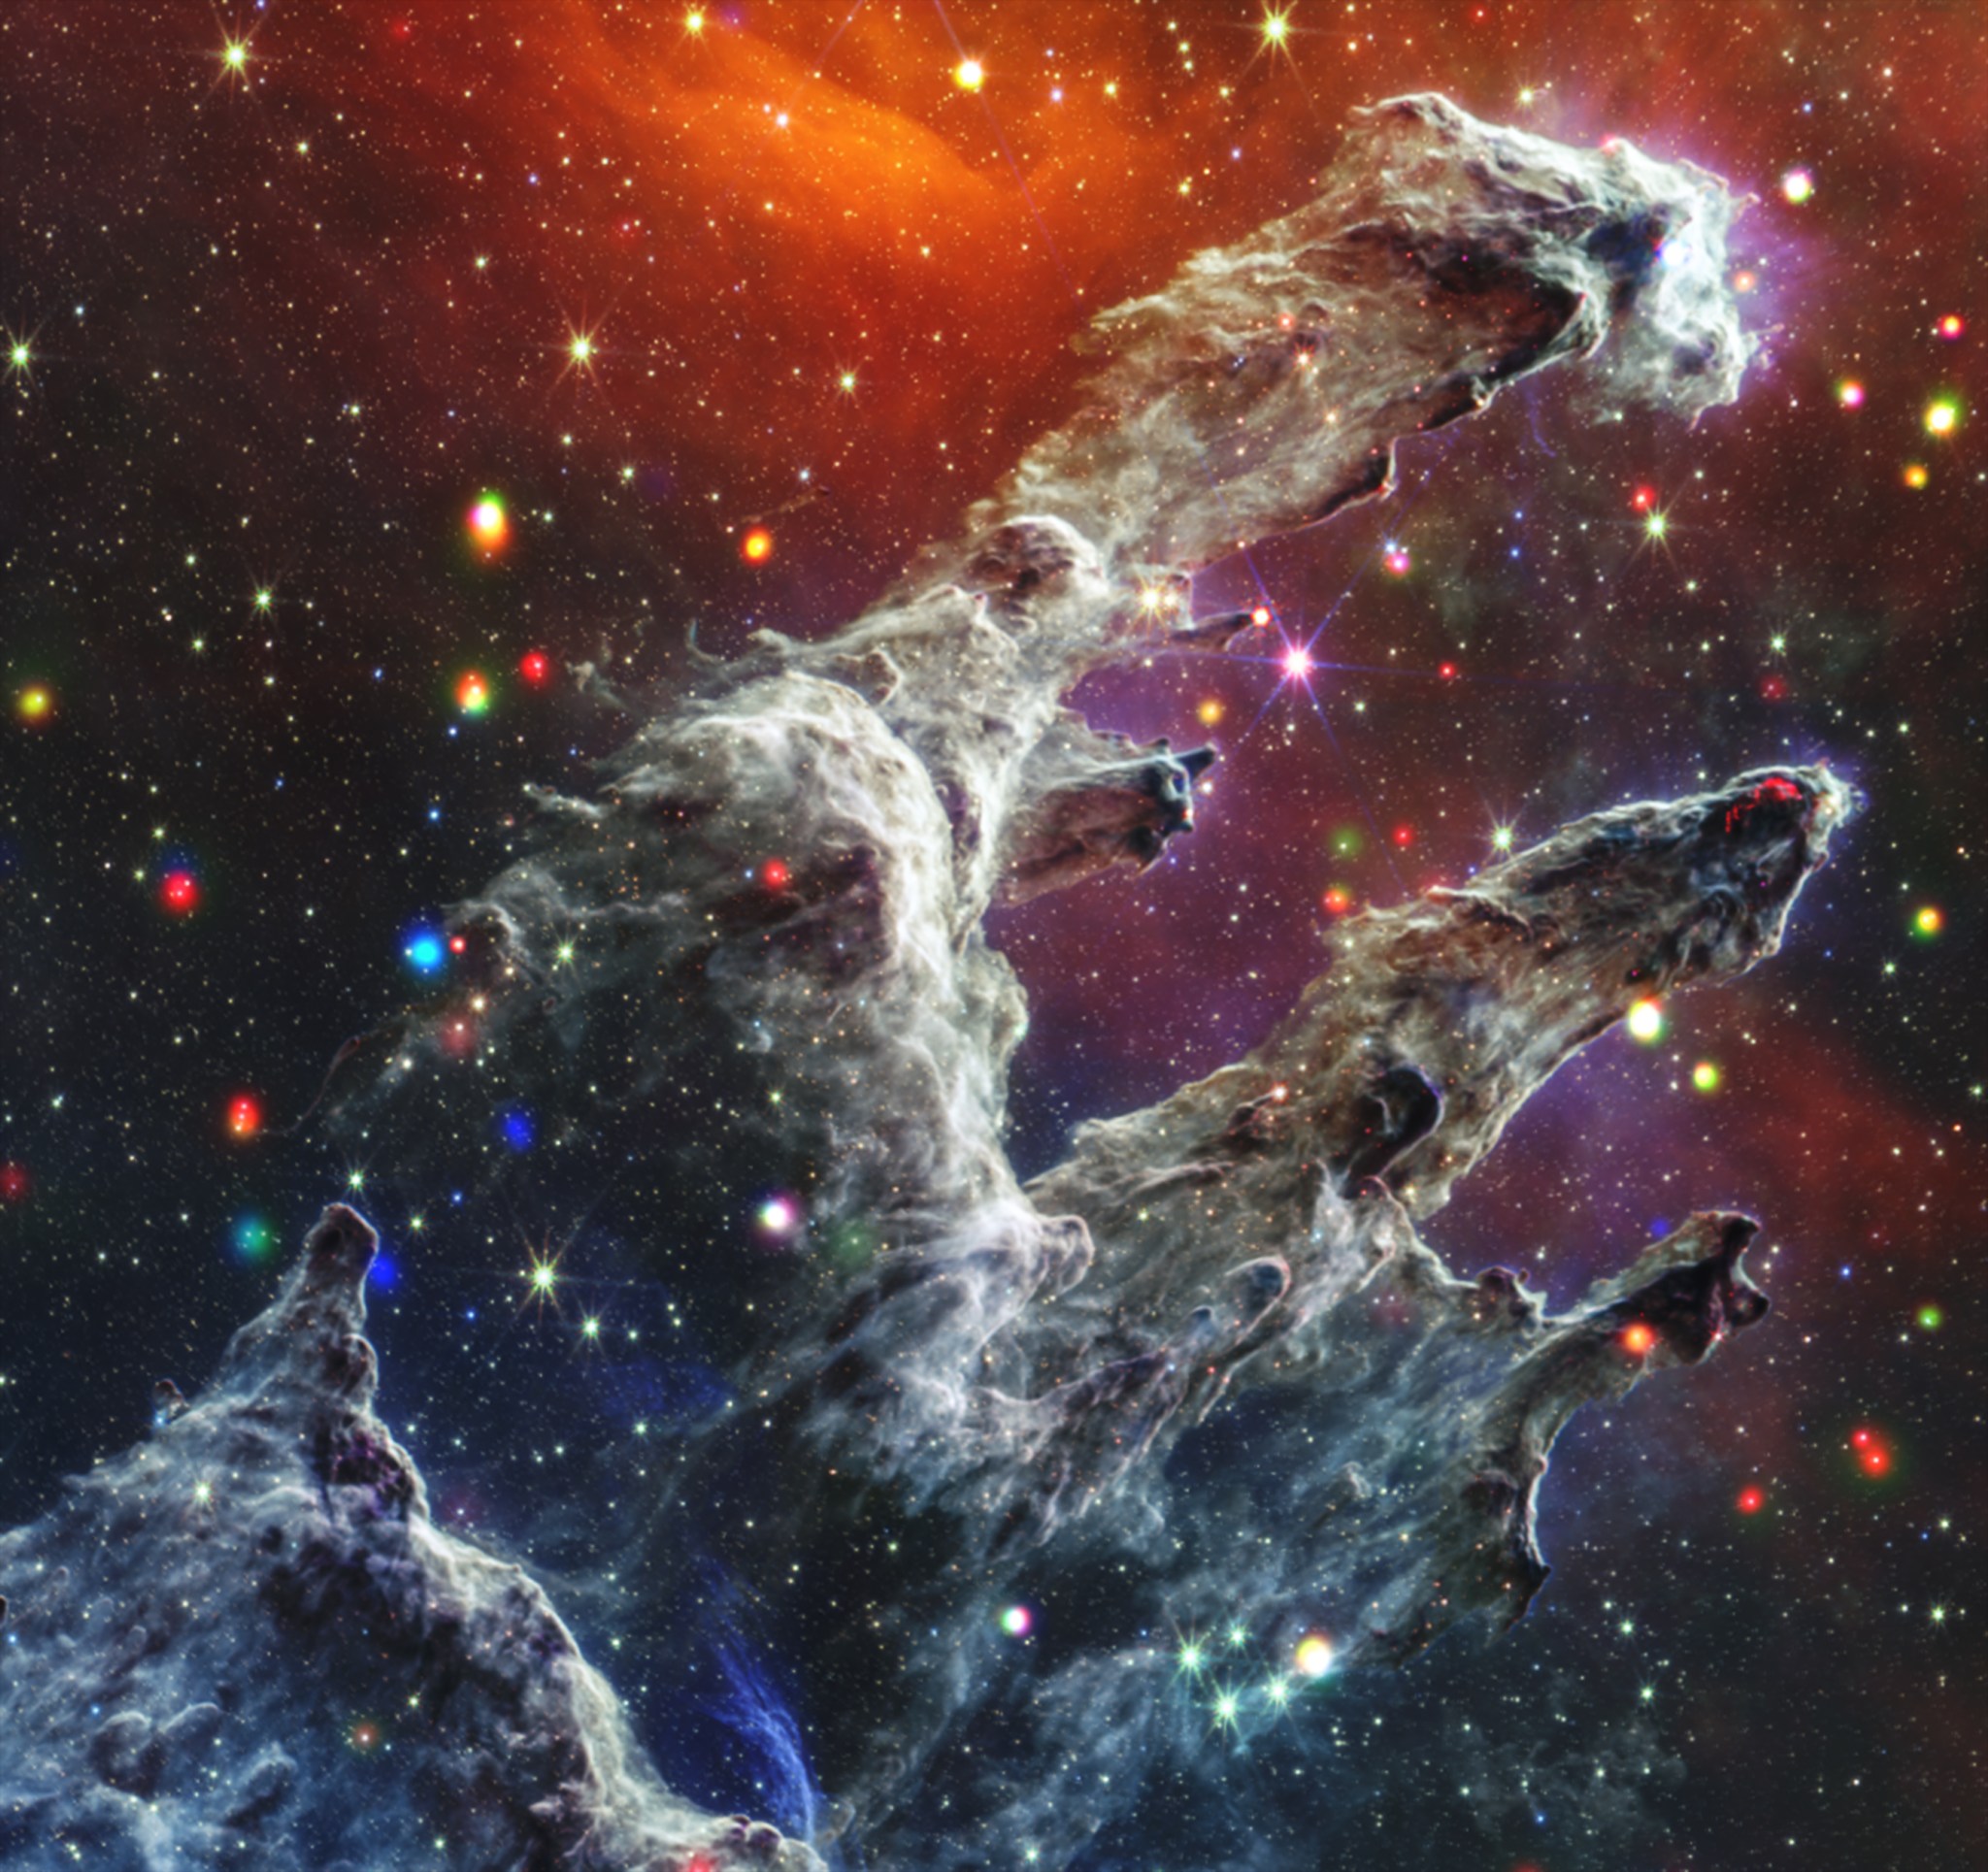 This composite image features a region of star formation known as the Pillars of Creation. Here, tall columns of grey gas and dust emerge from the bottom edge of the image, stretching toward our upper right. Backed by dark orange and pink mist, the cloudy grey columns are surrounded by dozens of soft, glowing, dots in whites, reds, blues, yellows, and purples. These dots are young stars emitting X-ray and infrared light. Churning with turbulent gas and dust, the columns lean to our right with small offshoots pointing in the same direction. The misty glow, colorful stars, and lifelike grey dust formations combine to create an image of yearning cloud creatures at dusk, reaching for something just out of frame.